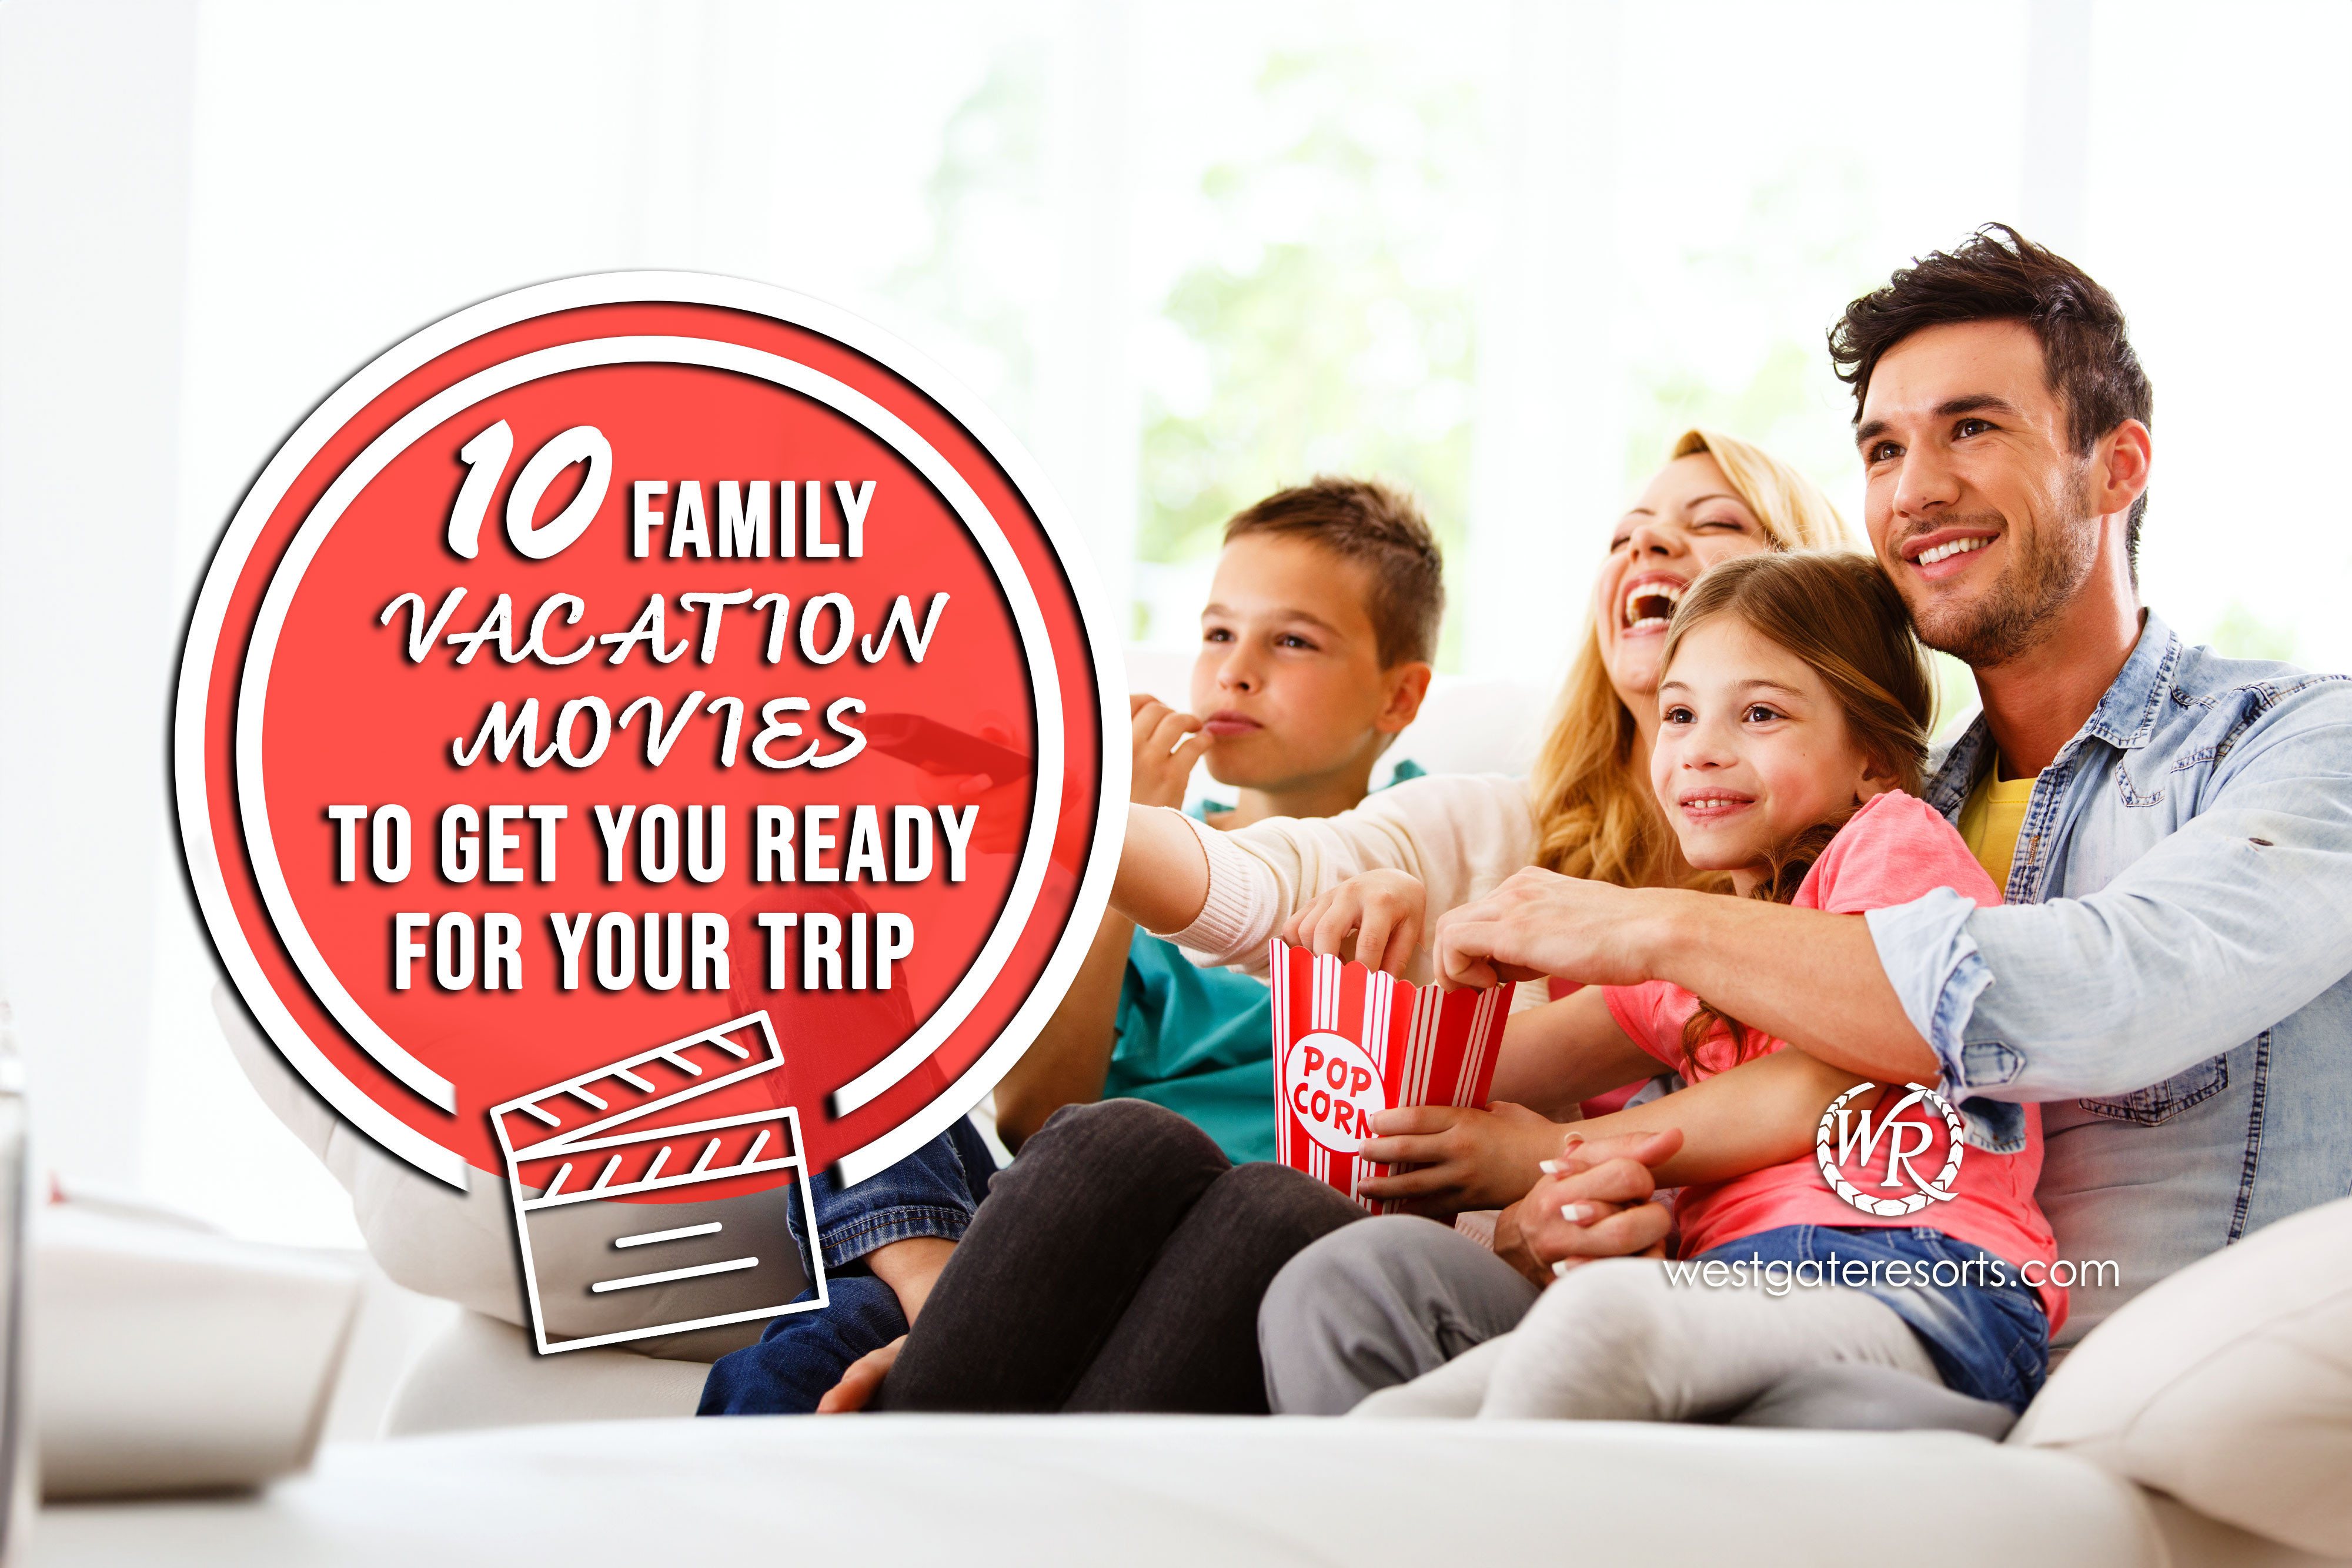 10 Family Vacation Movies To Get You Ready for Your Trip